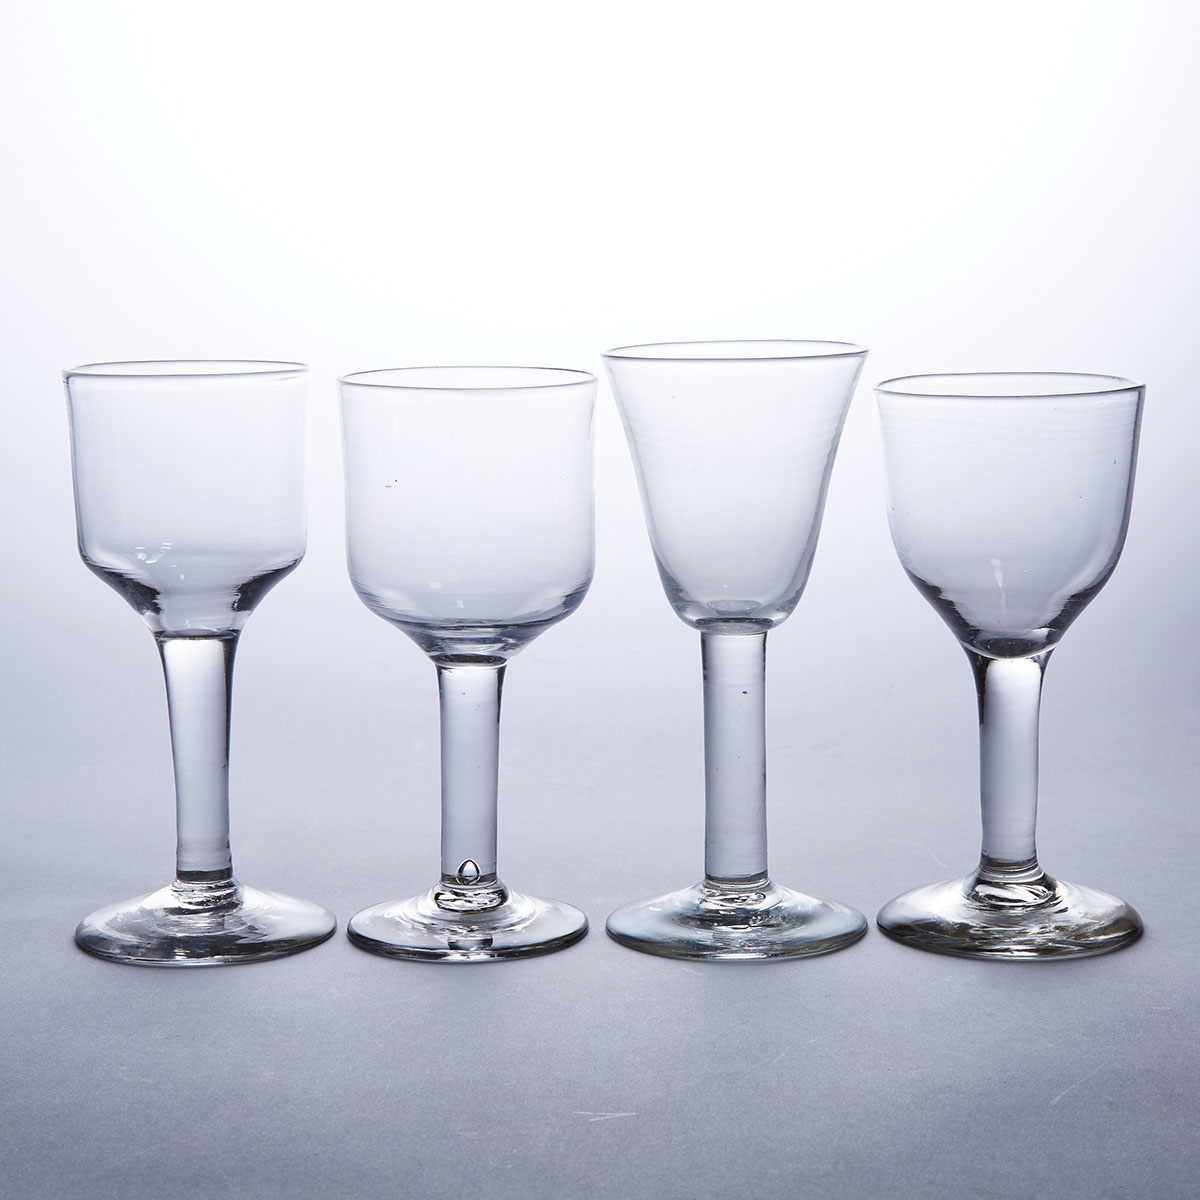 Four English Plain Stemmed Glass Goblets, mid-18th century